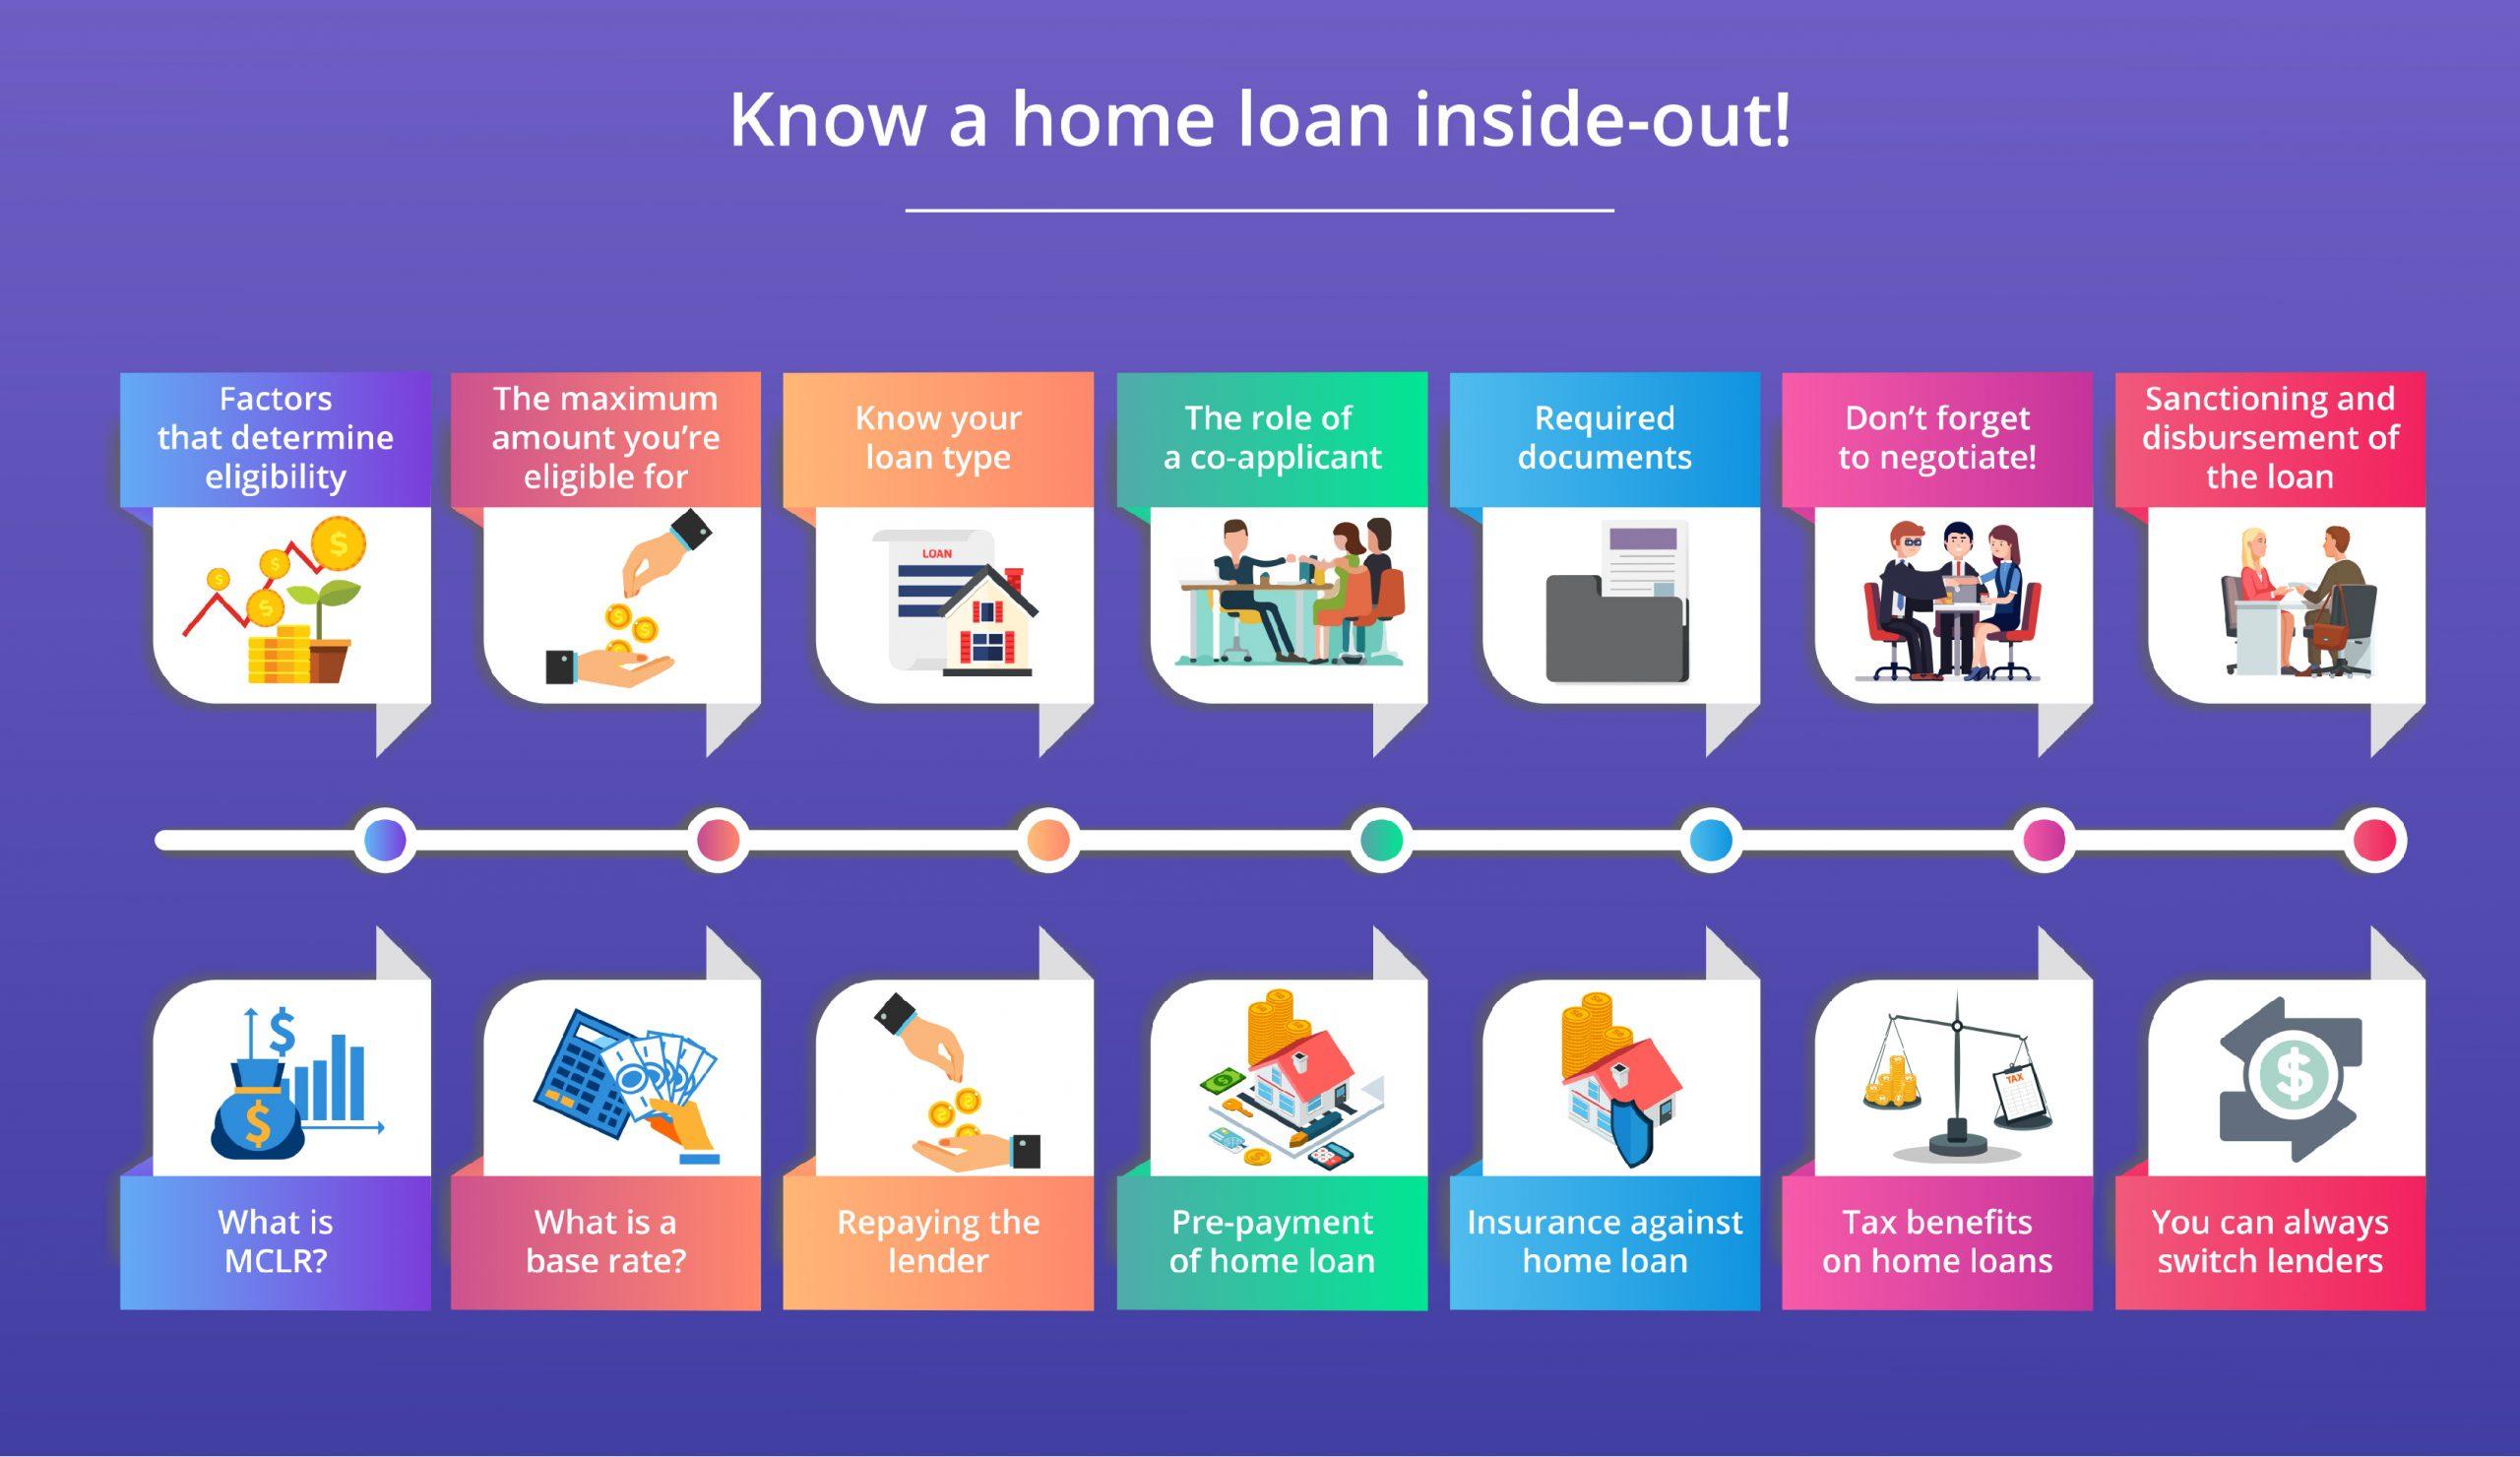 Know a home loan inside-out!